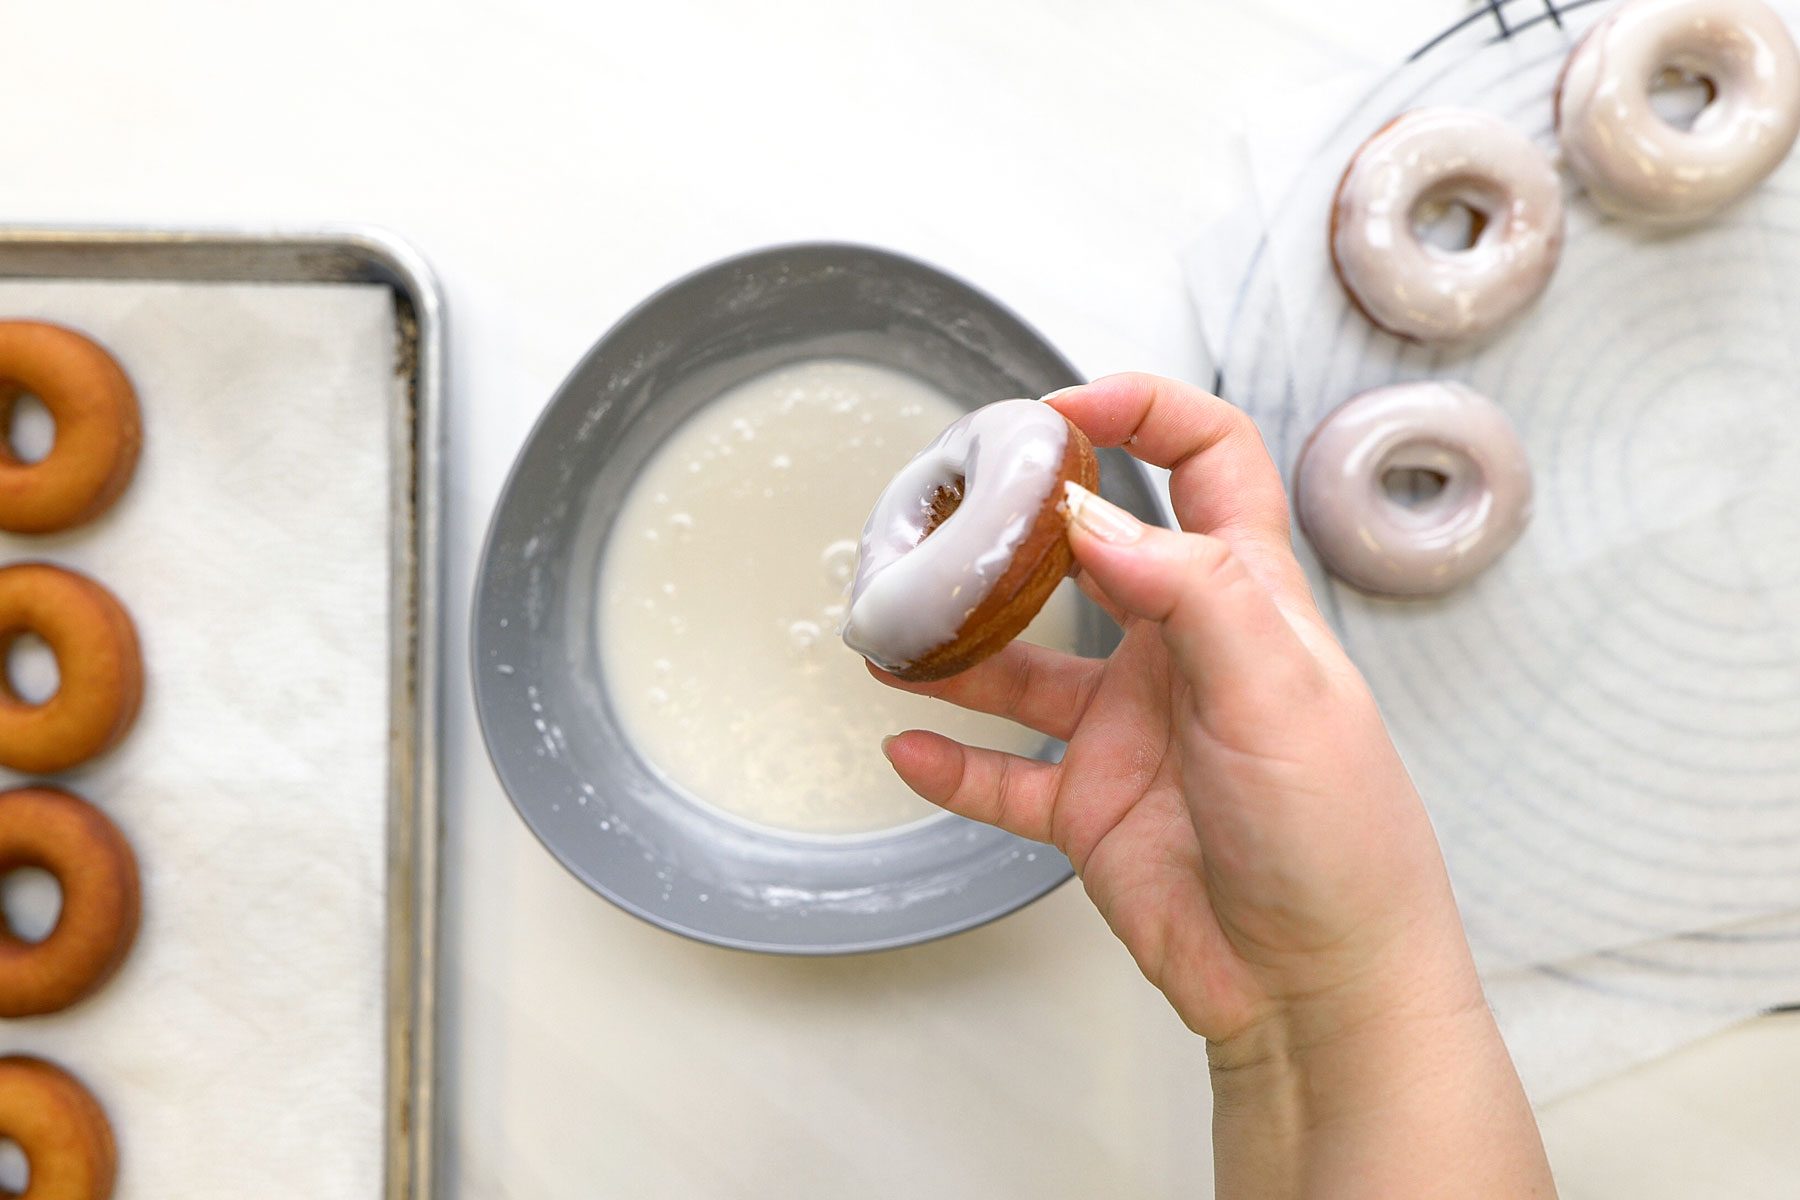 Dipping the doughnuts into the mixture in a large bowl